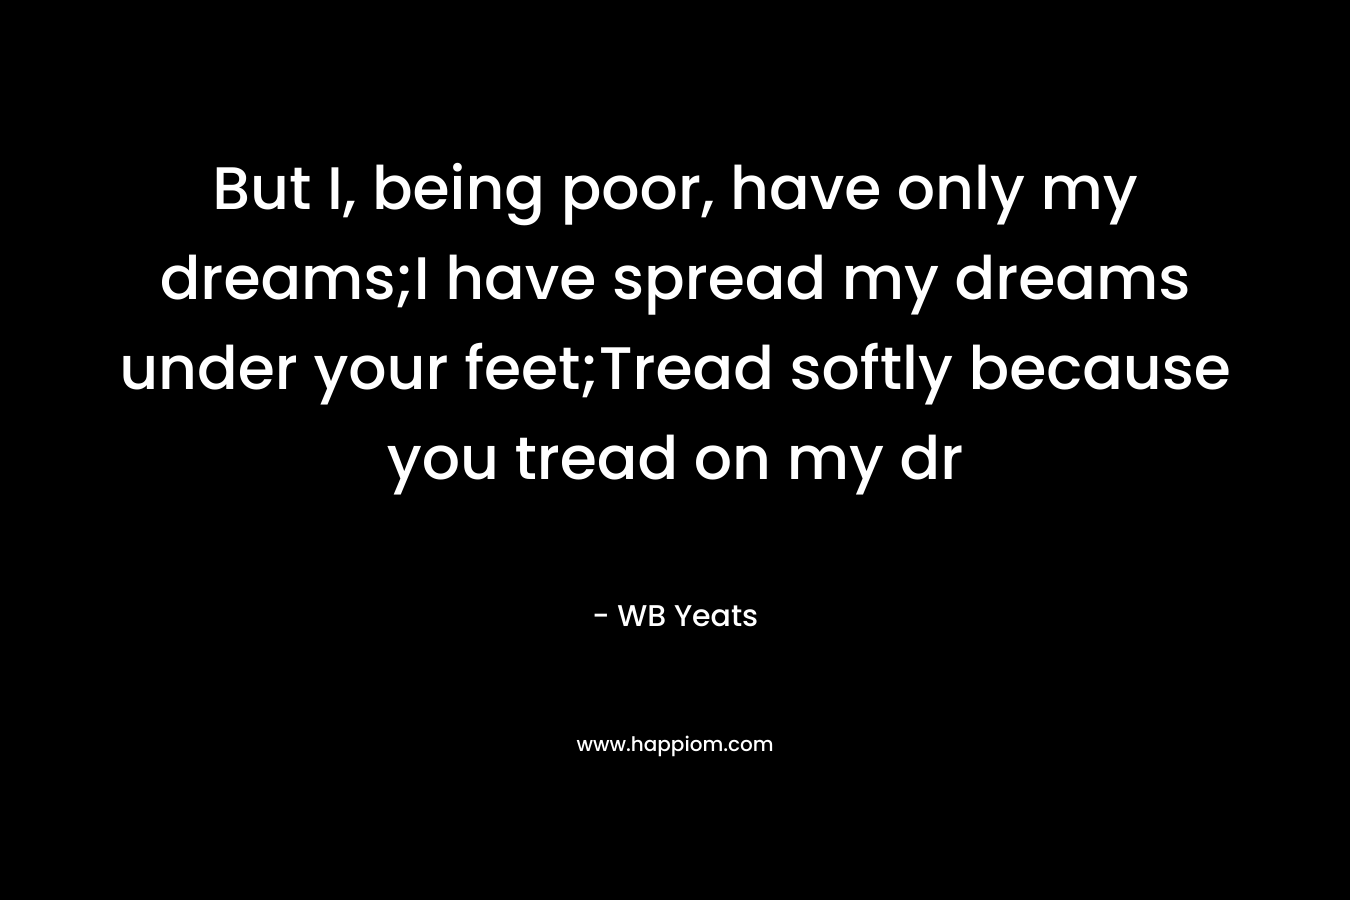 But I, being poor, have only my dreams;I have spread my dreams under your feet;Tread softly because you tread on my dr